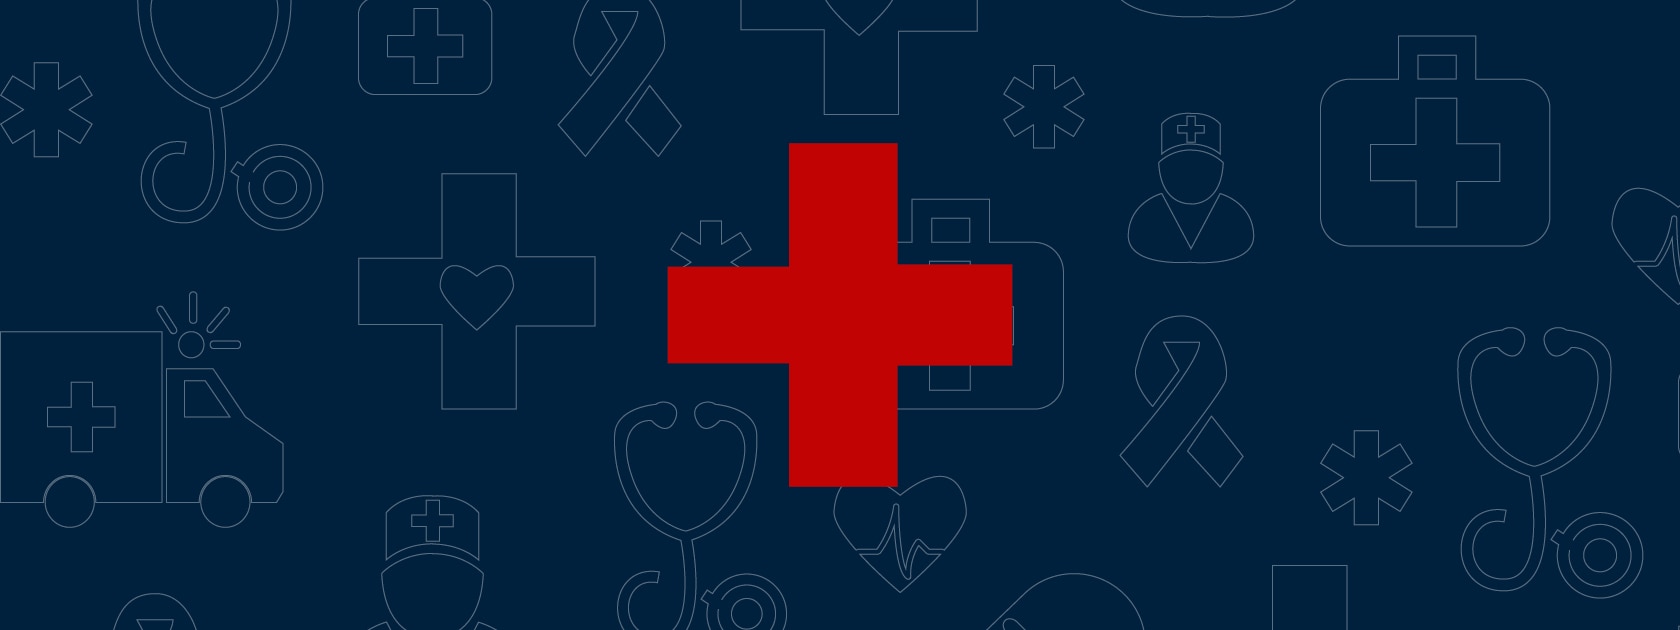 a navy blue background with light grey medical icons and a red cross